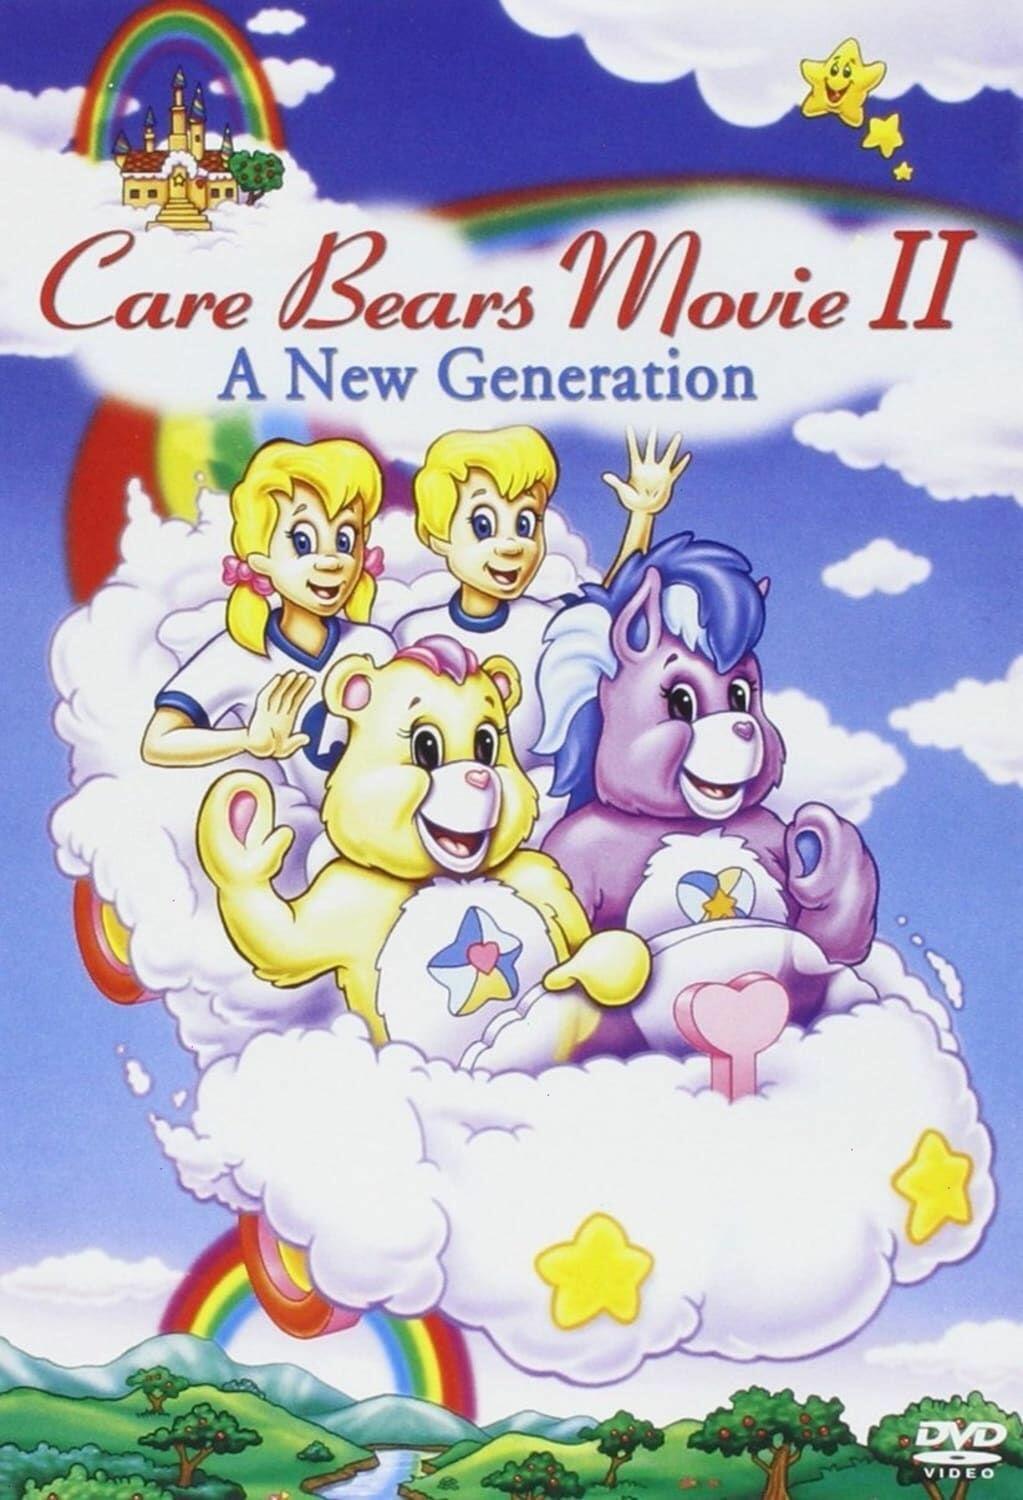 CARE BEARS MOVIE 2:NEW GENERATION BY CARE BEARS (DVD)